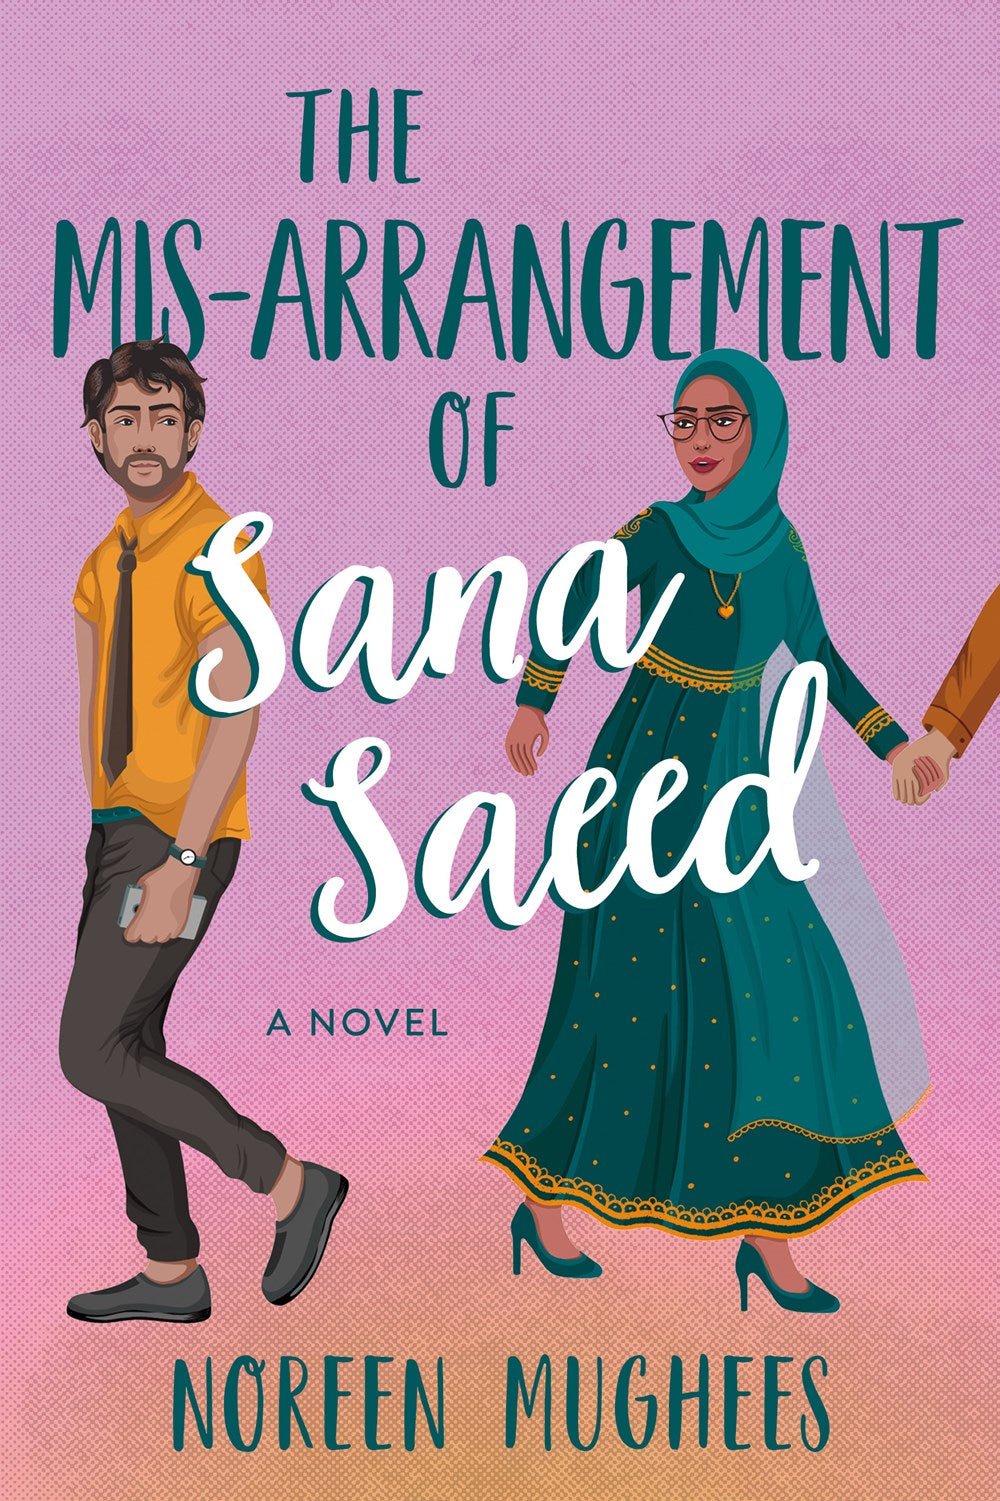 The Mis-Arrangement of Sana Saeed by Noreen Mughees (Paperback)